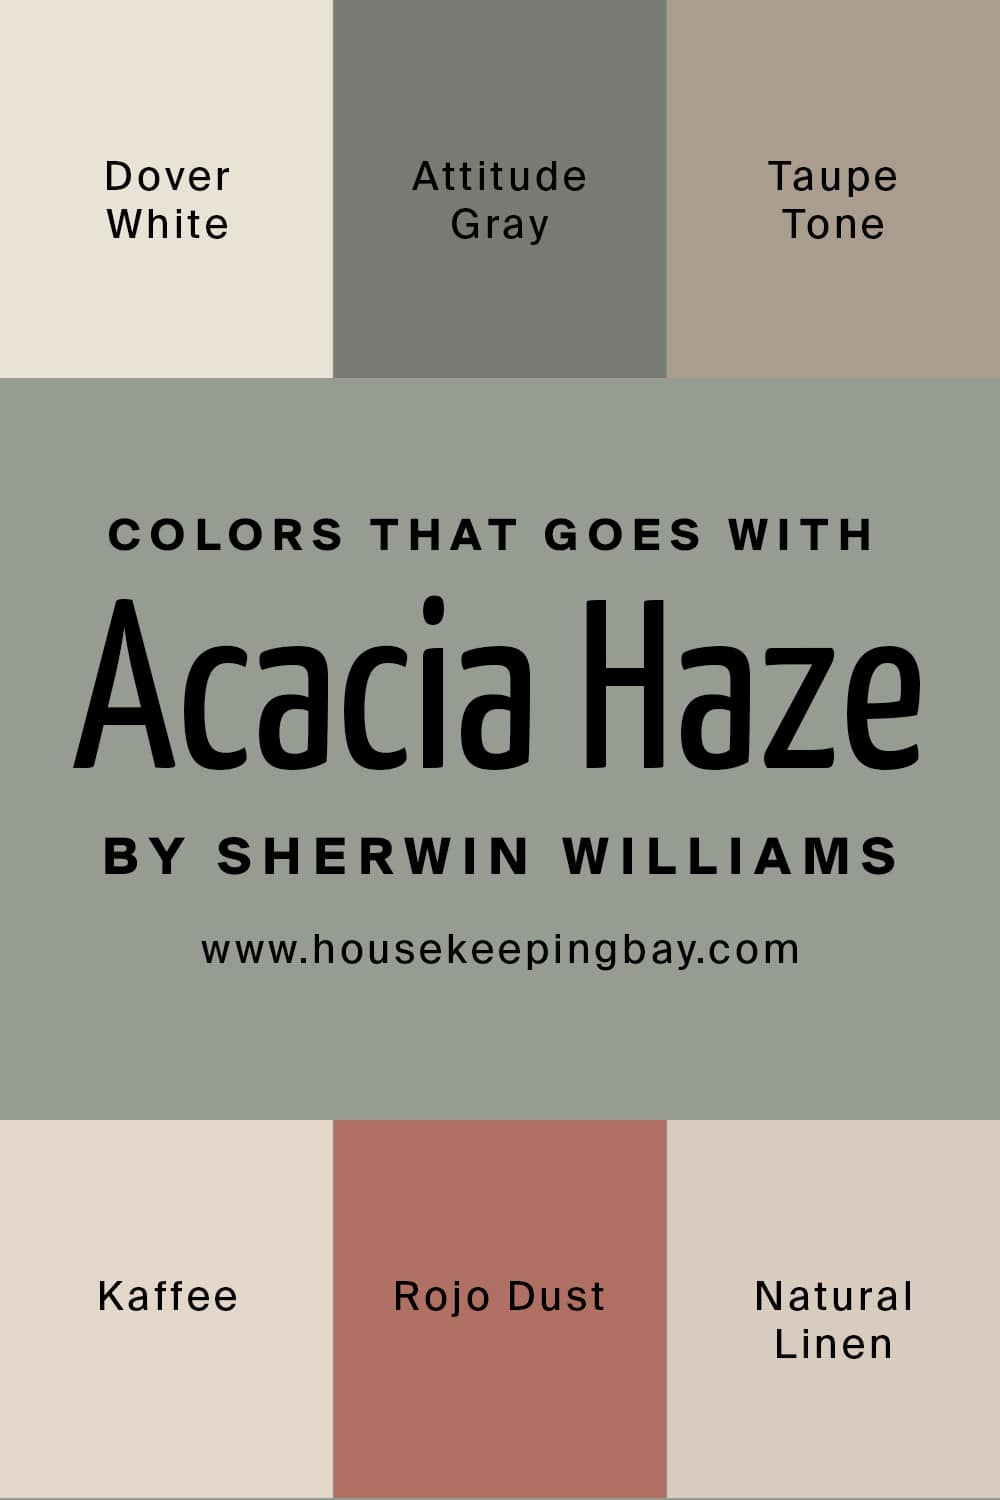 Colors that goes with Acacia Haze by Sherwin Williams